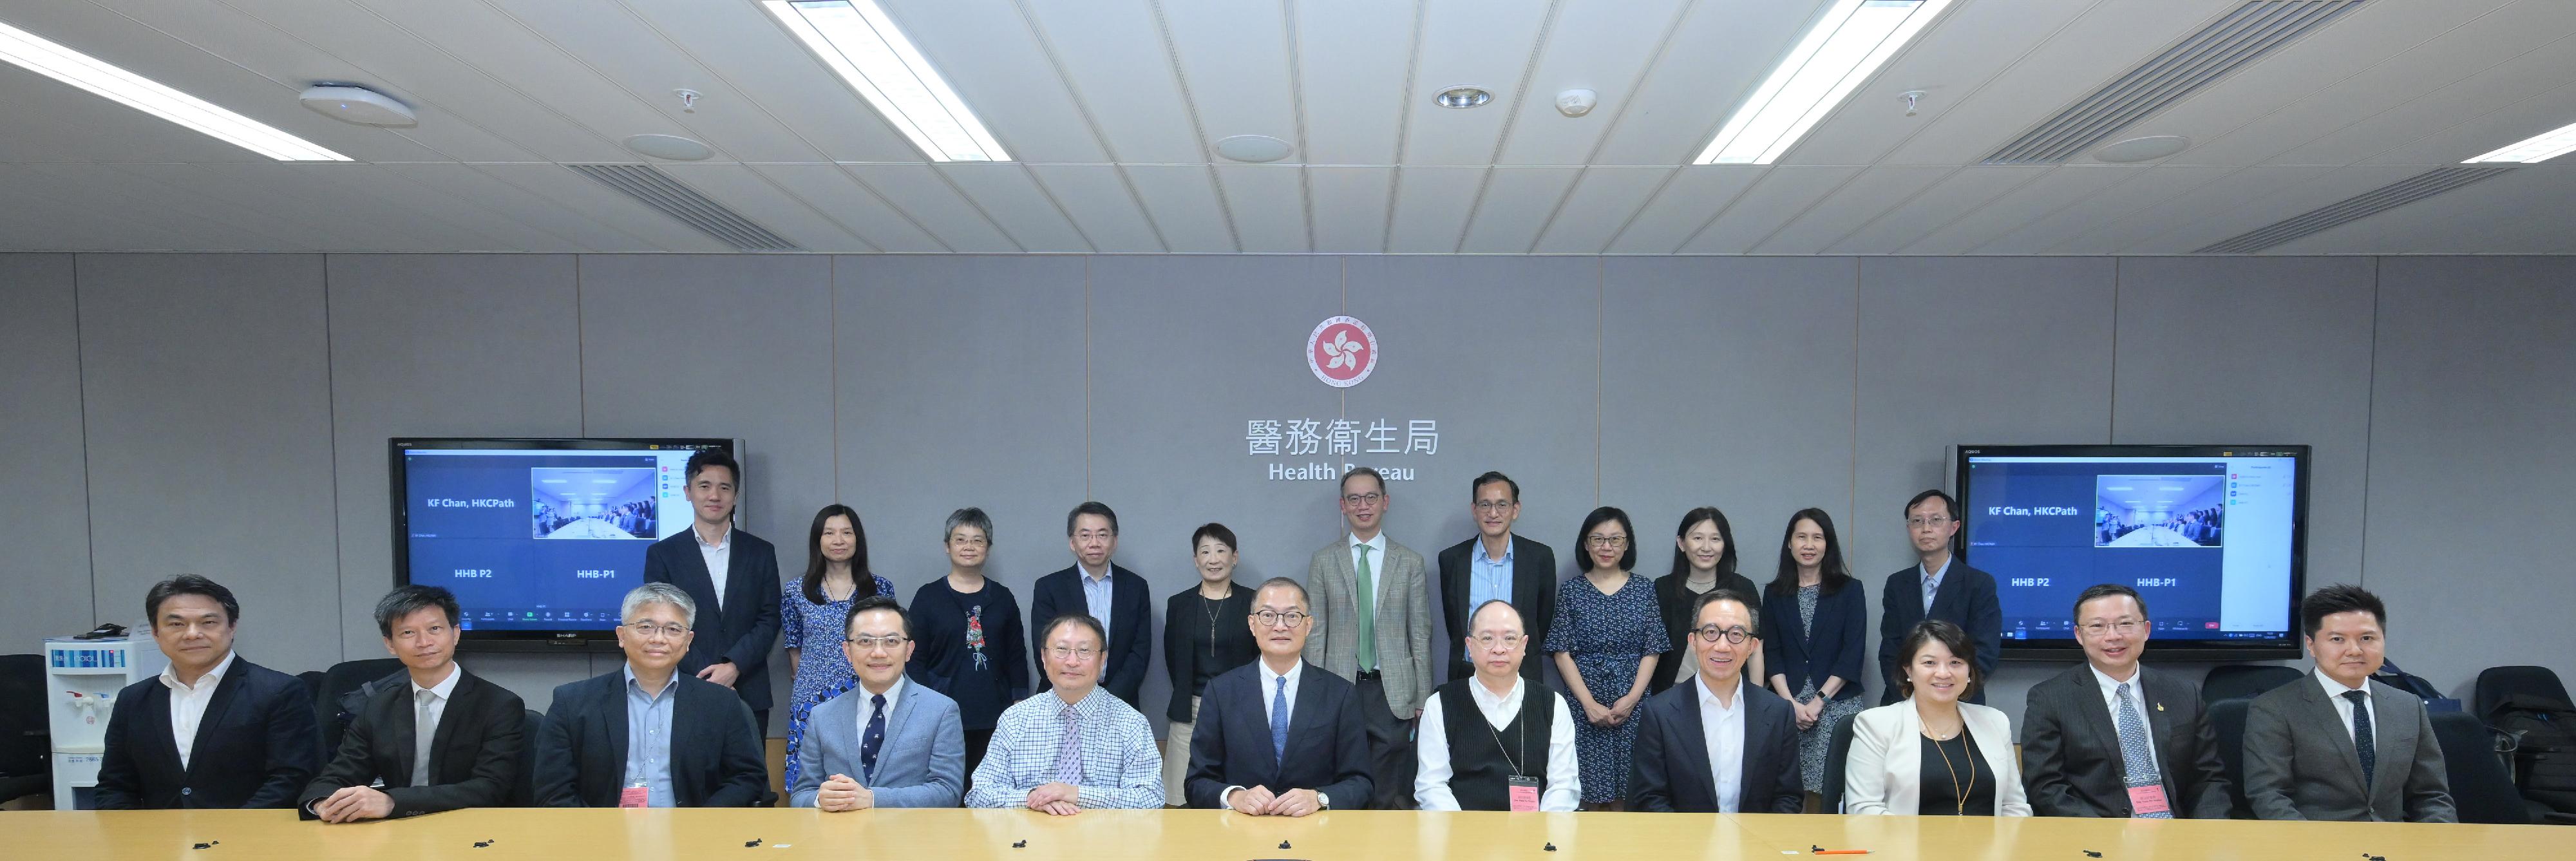 The Secretary for Health, Professor Lo Chung-mau, chaired the 18th meeting of the Cancer Coordinating Committe today (June 12) to review the implementation of the Hong Kong Cancer Strategy and discuss response strategies and measures with relevant Government departments and organisations. Photo shows Professor Lo (front row, centre); the Under Secretary for Health, Dr Libby Lee (front row, third right); the Director of Health, Dr Ronald Lam (front row, fourth left); and members before the meeting.